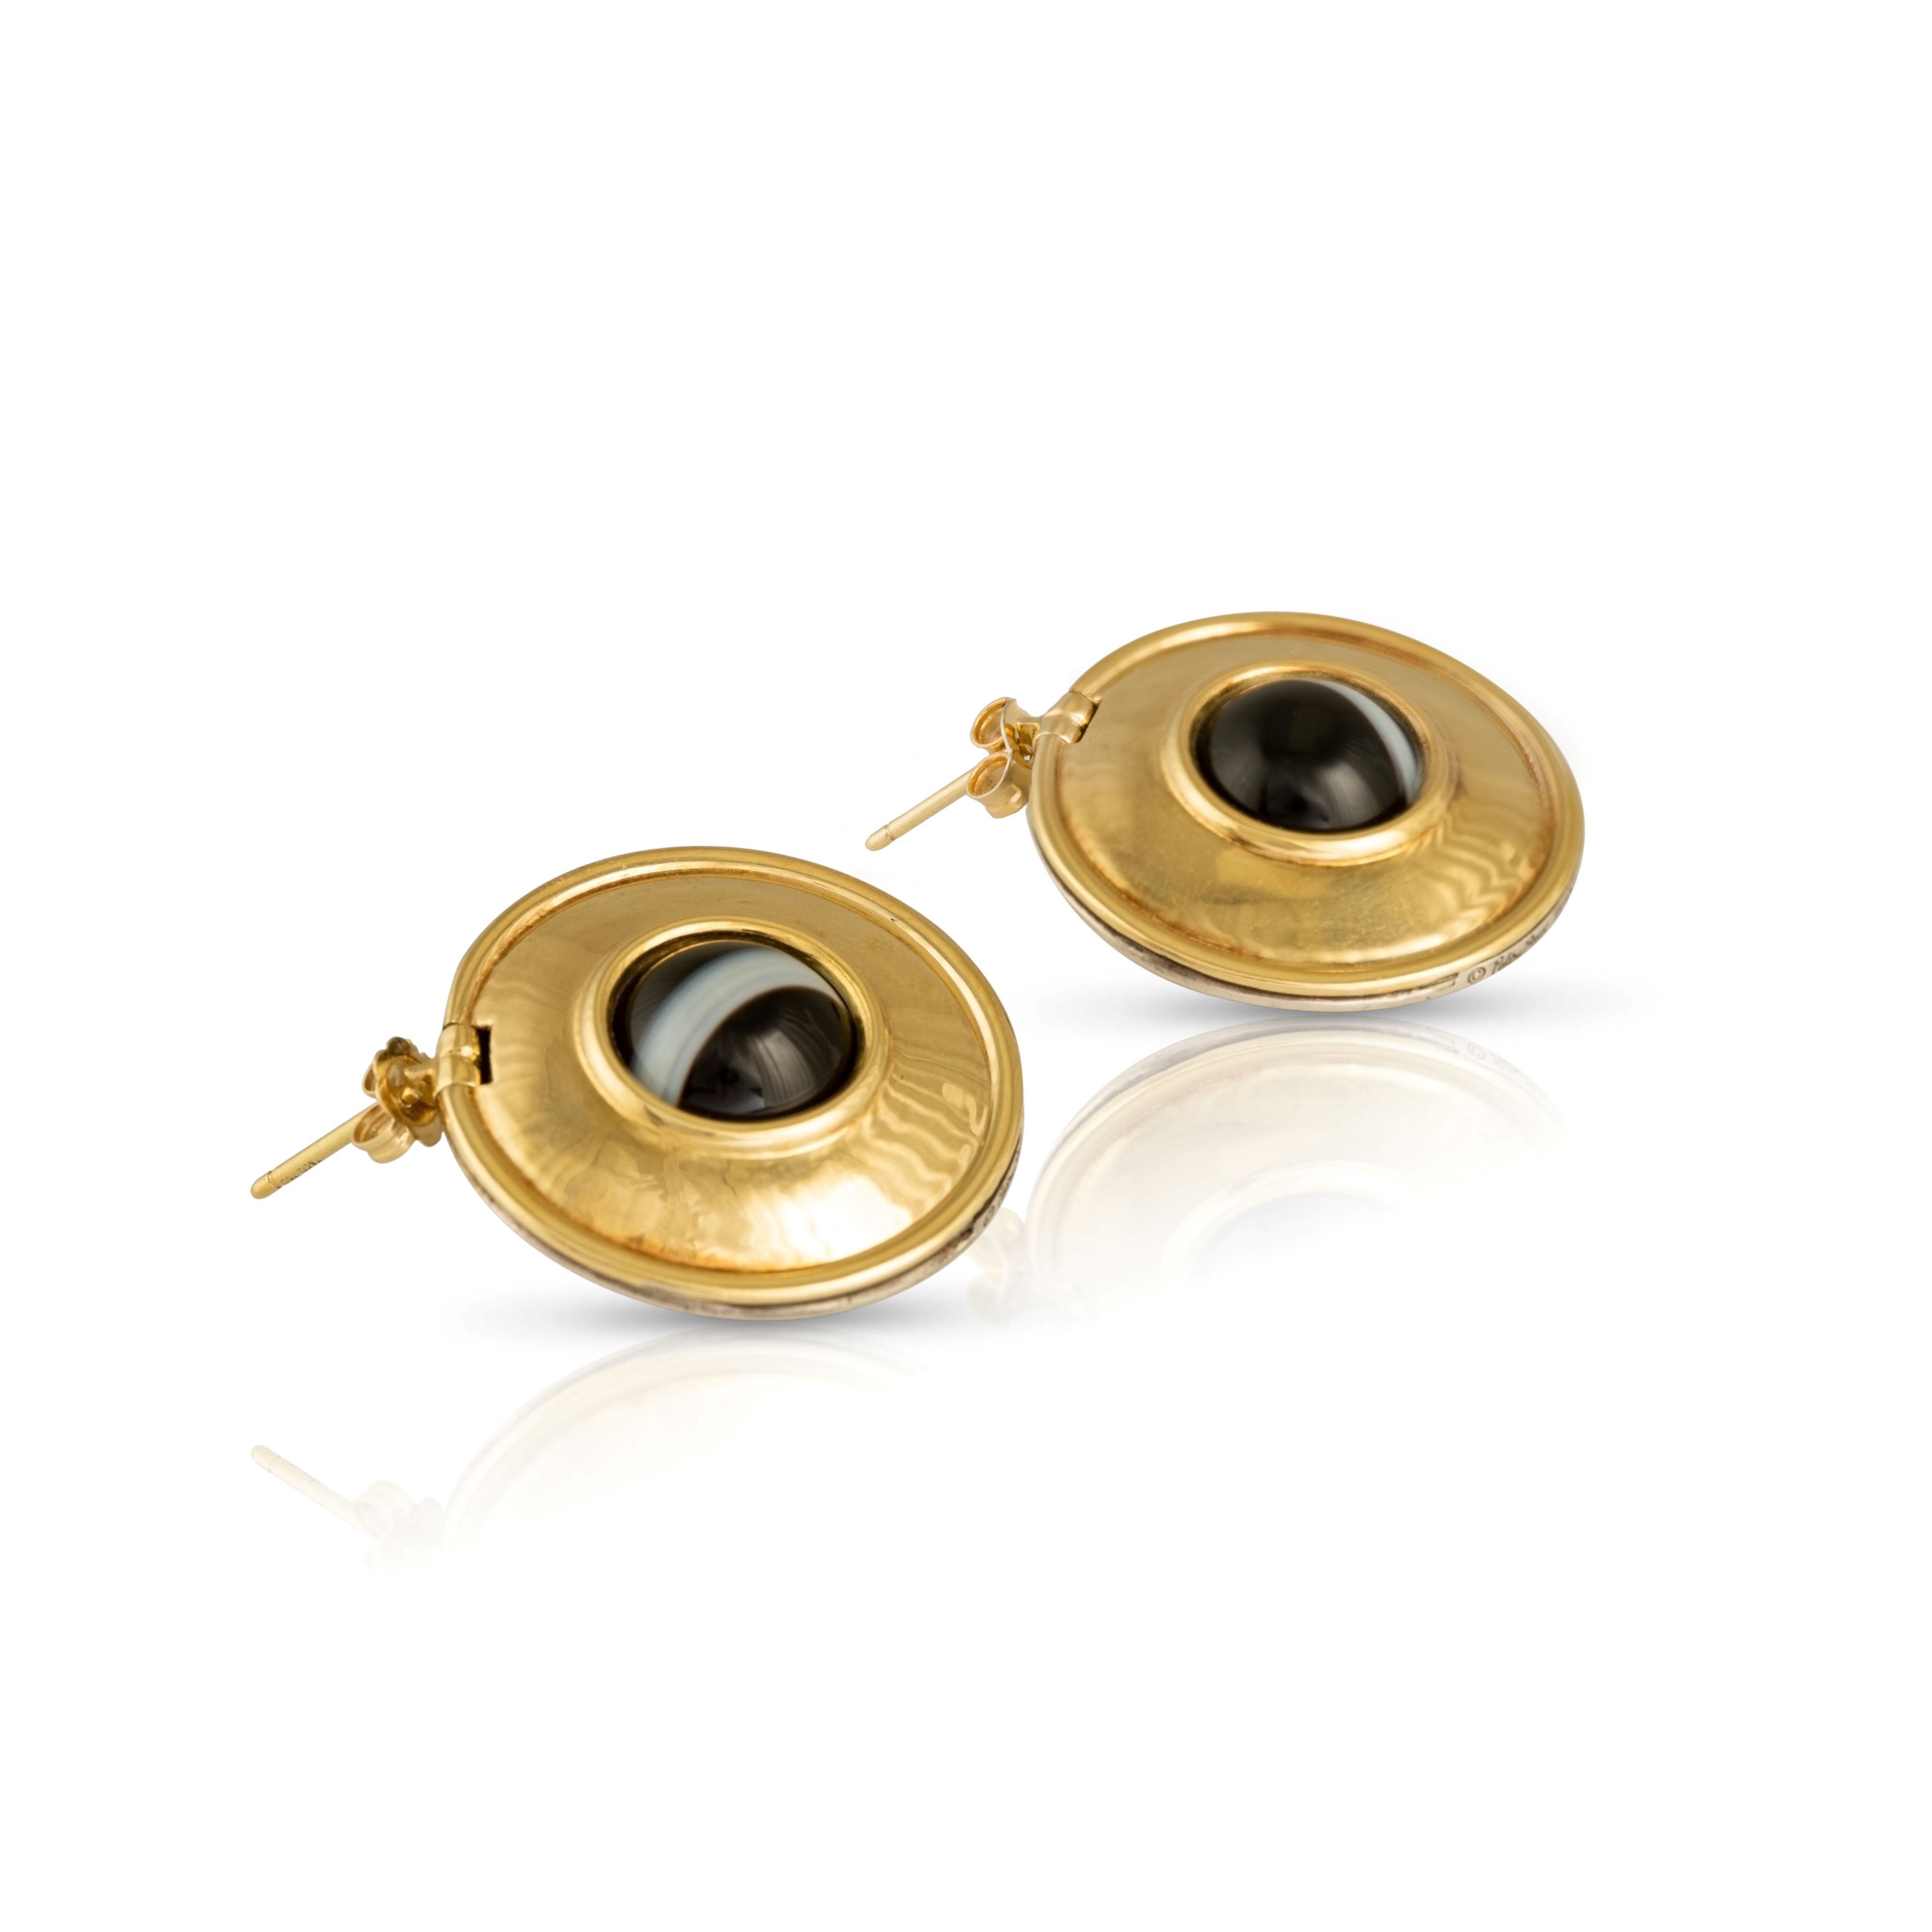 Vintage Tiffany & Co. earrings in gold and silver with a central bull’s eye agate bead.